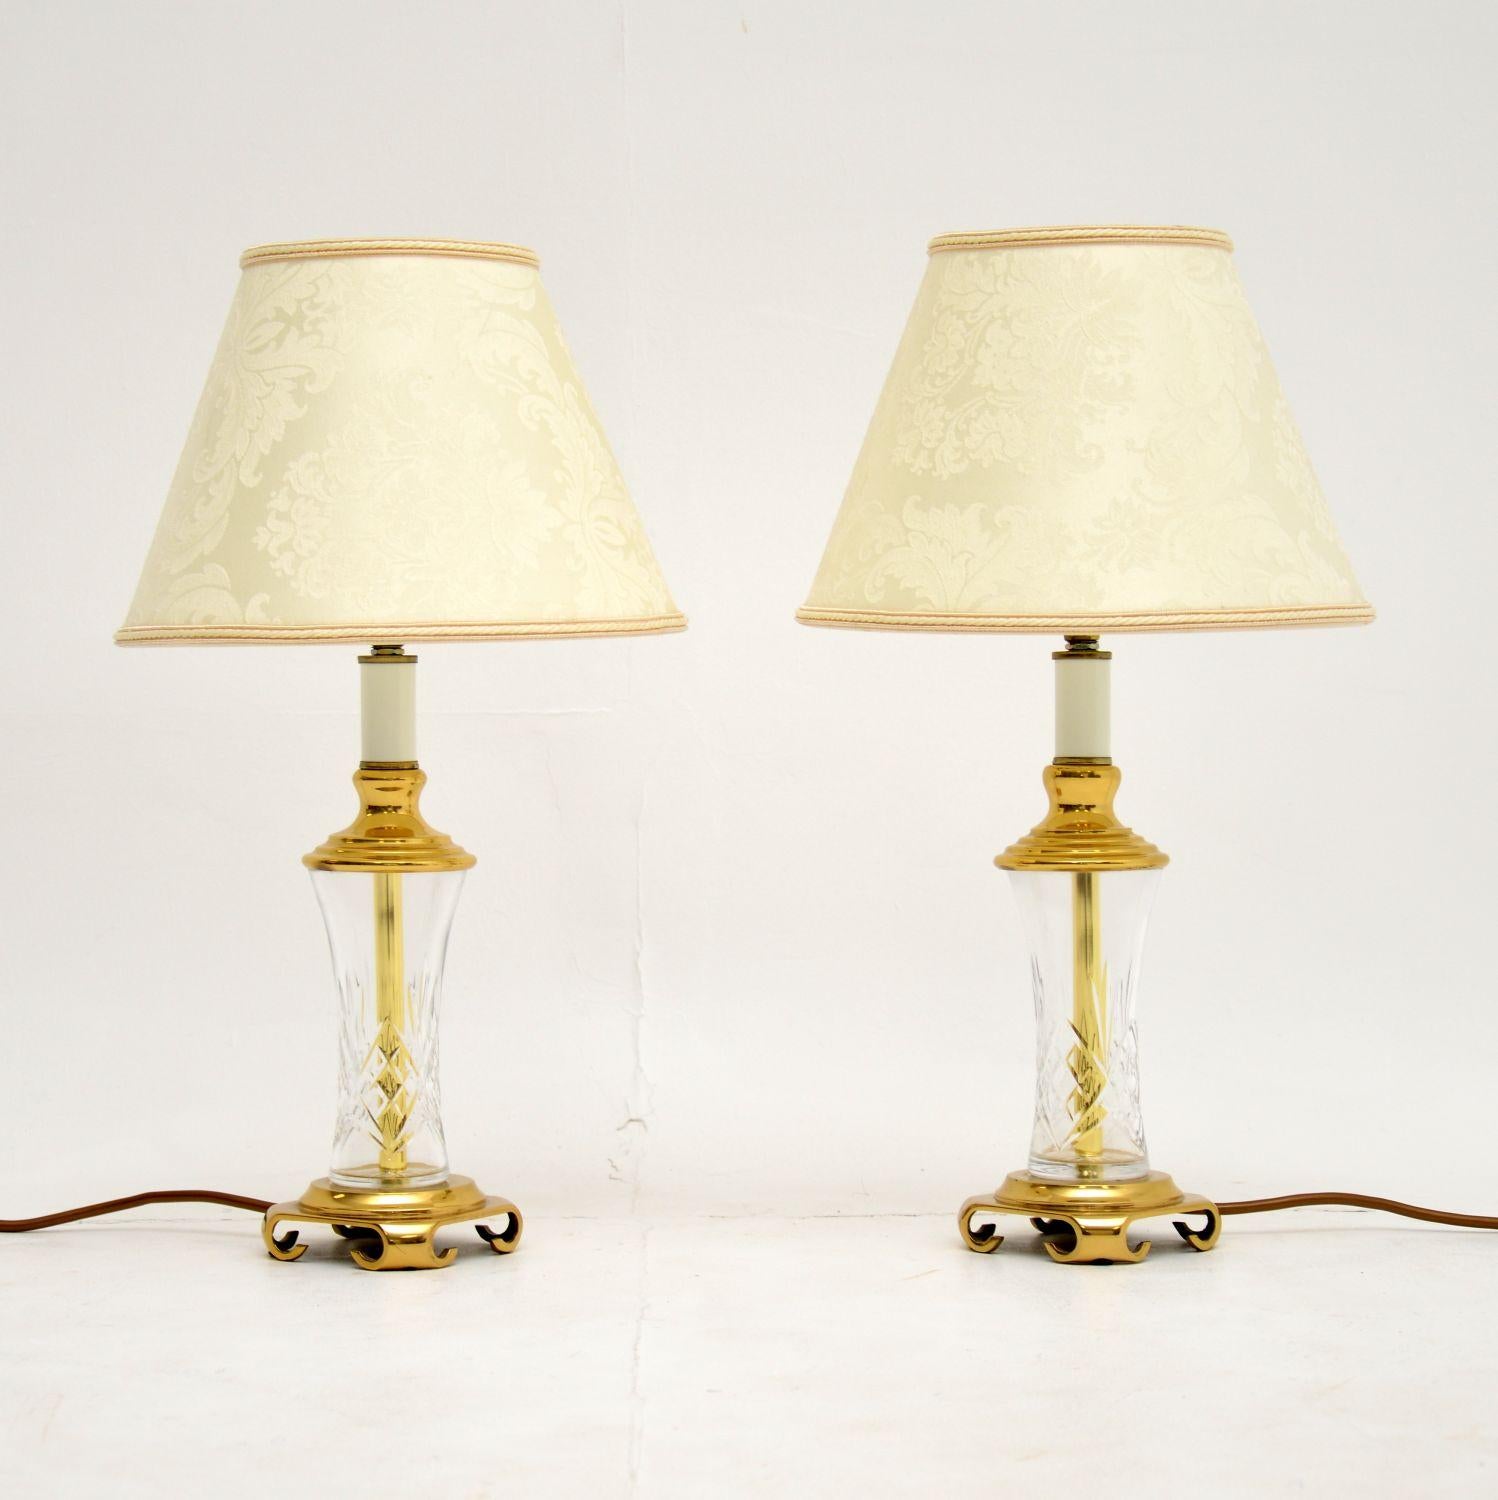 A beautiful pair of table lamps, in the antique neoclassical style. These date from around the mid-20th century.

They are of fine quality, and are made from beautiful etched crystal glass with solid brass bases and supports. They have lovely